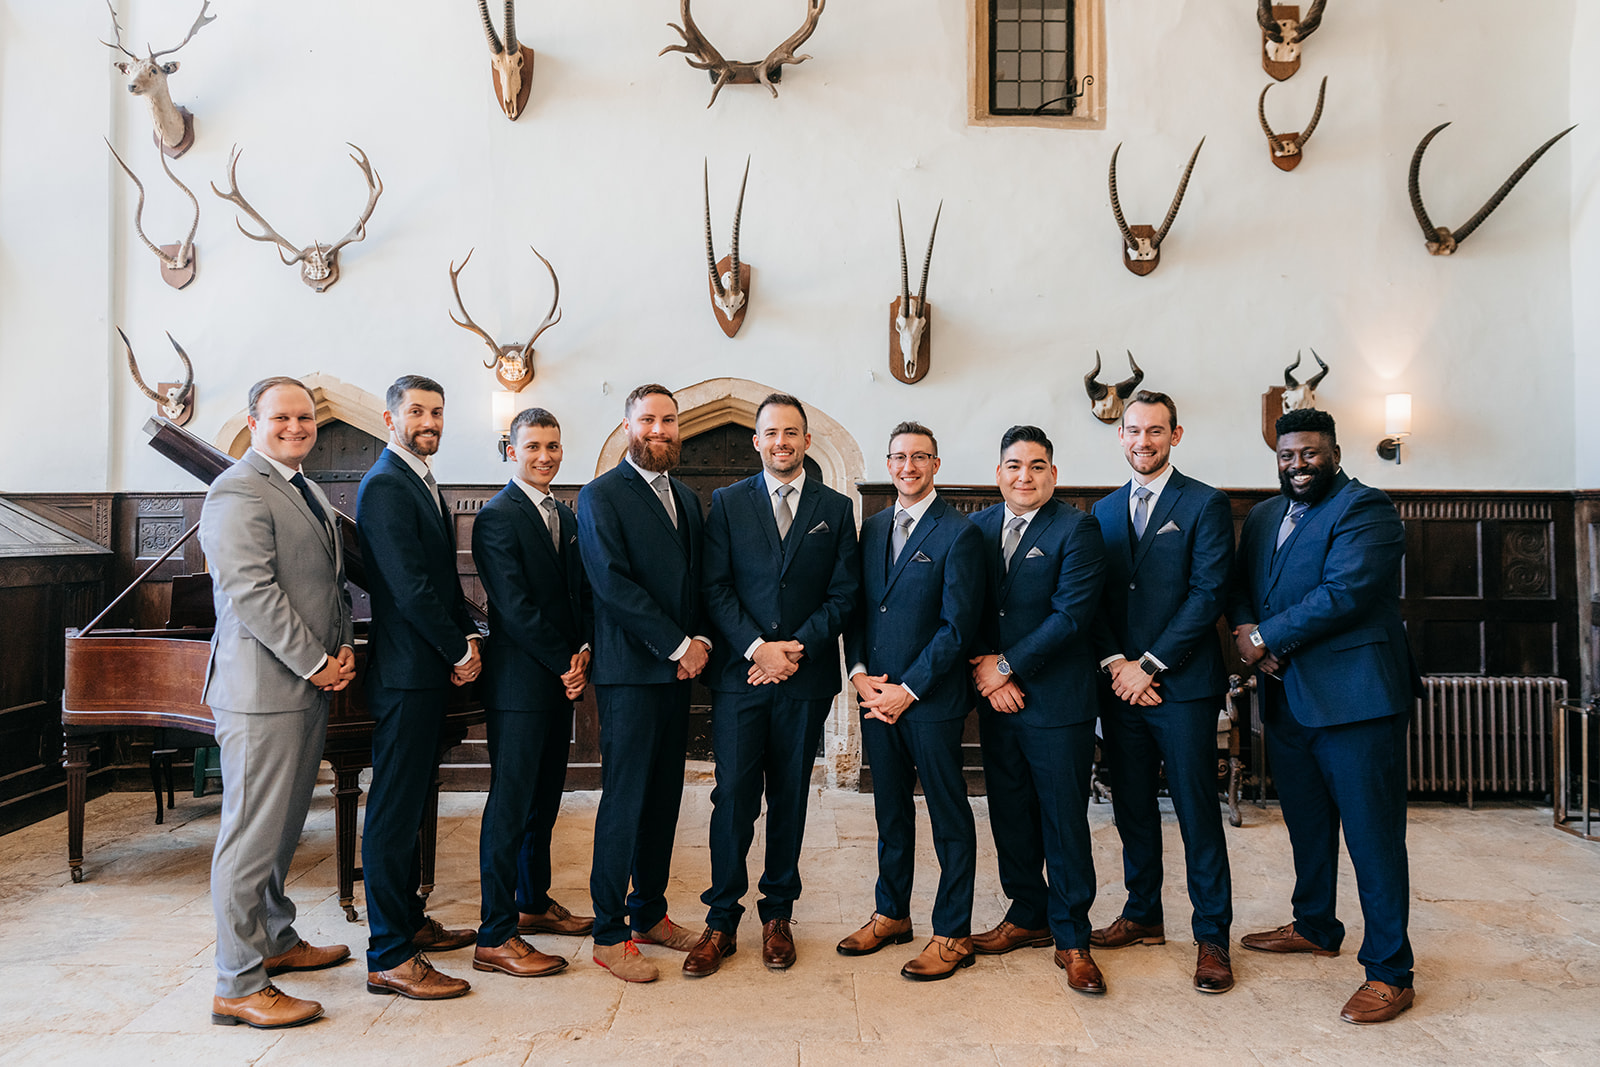 The groomsmen in the great hall before the wedding ceremony